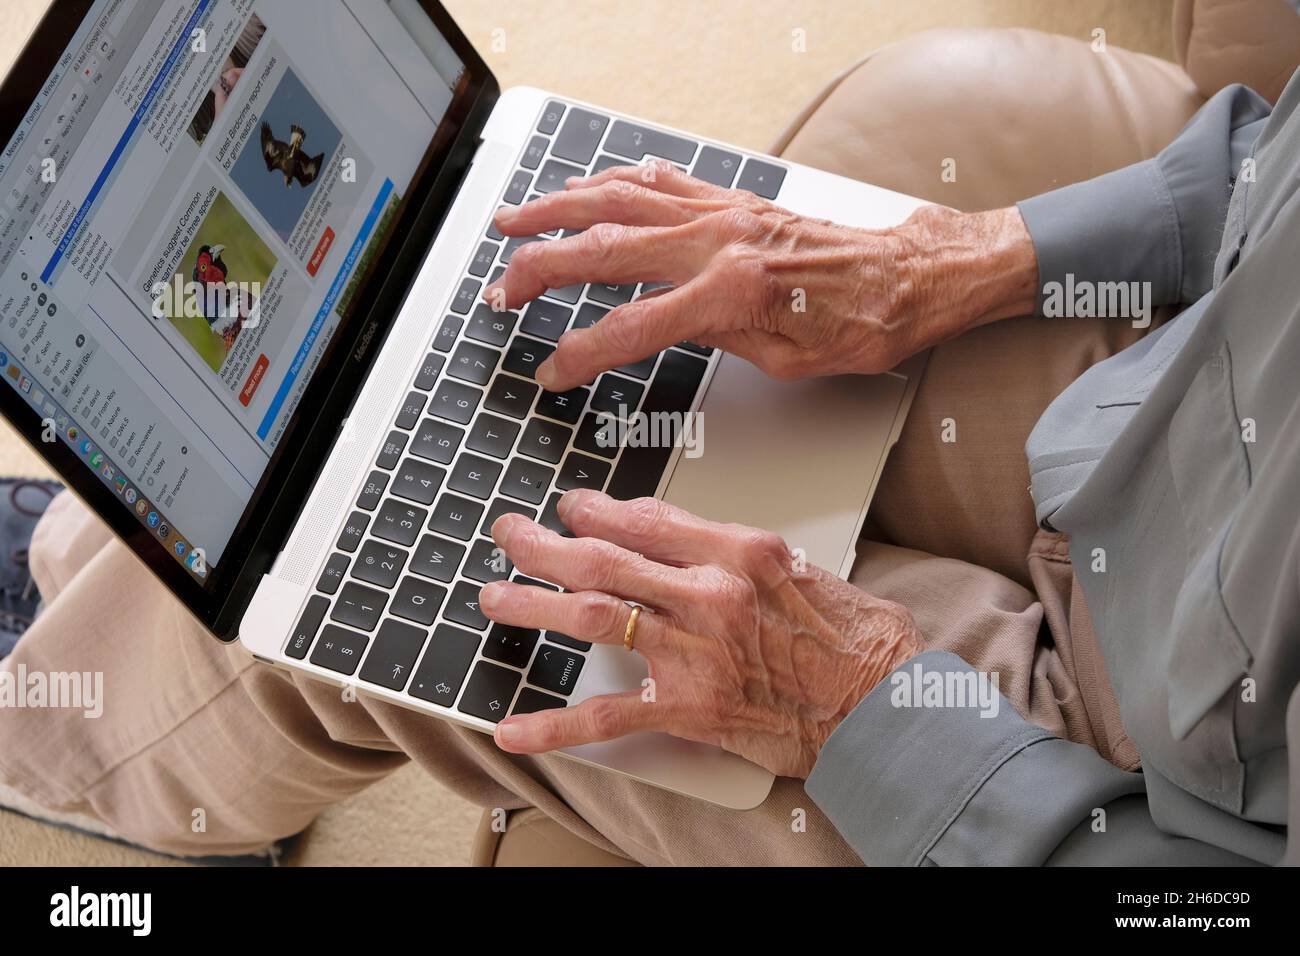 Hands of a senior lady using a laptop computer Stock Photo